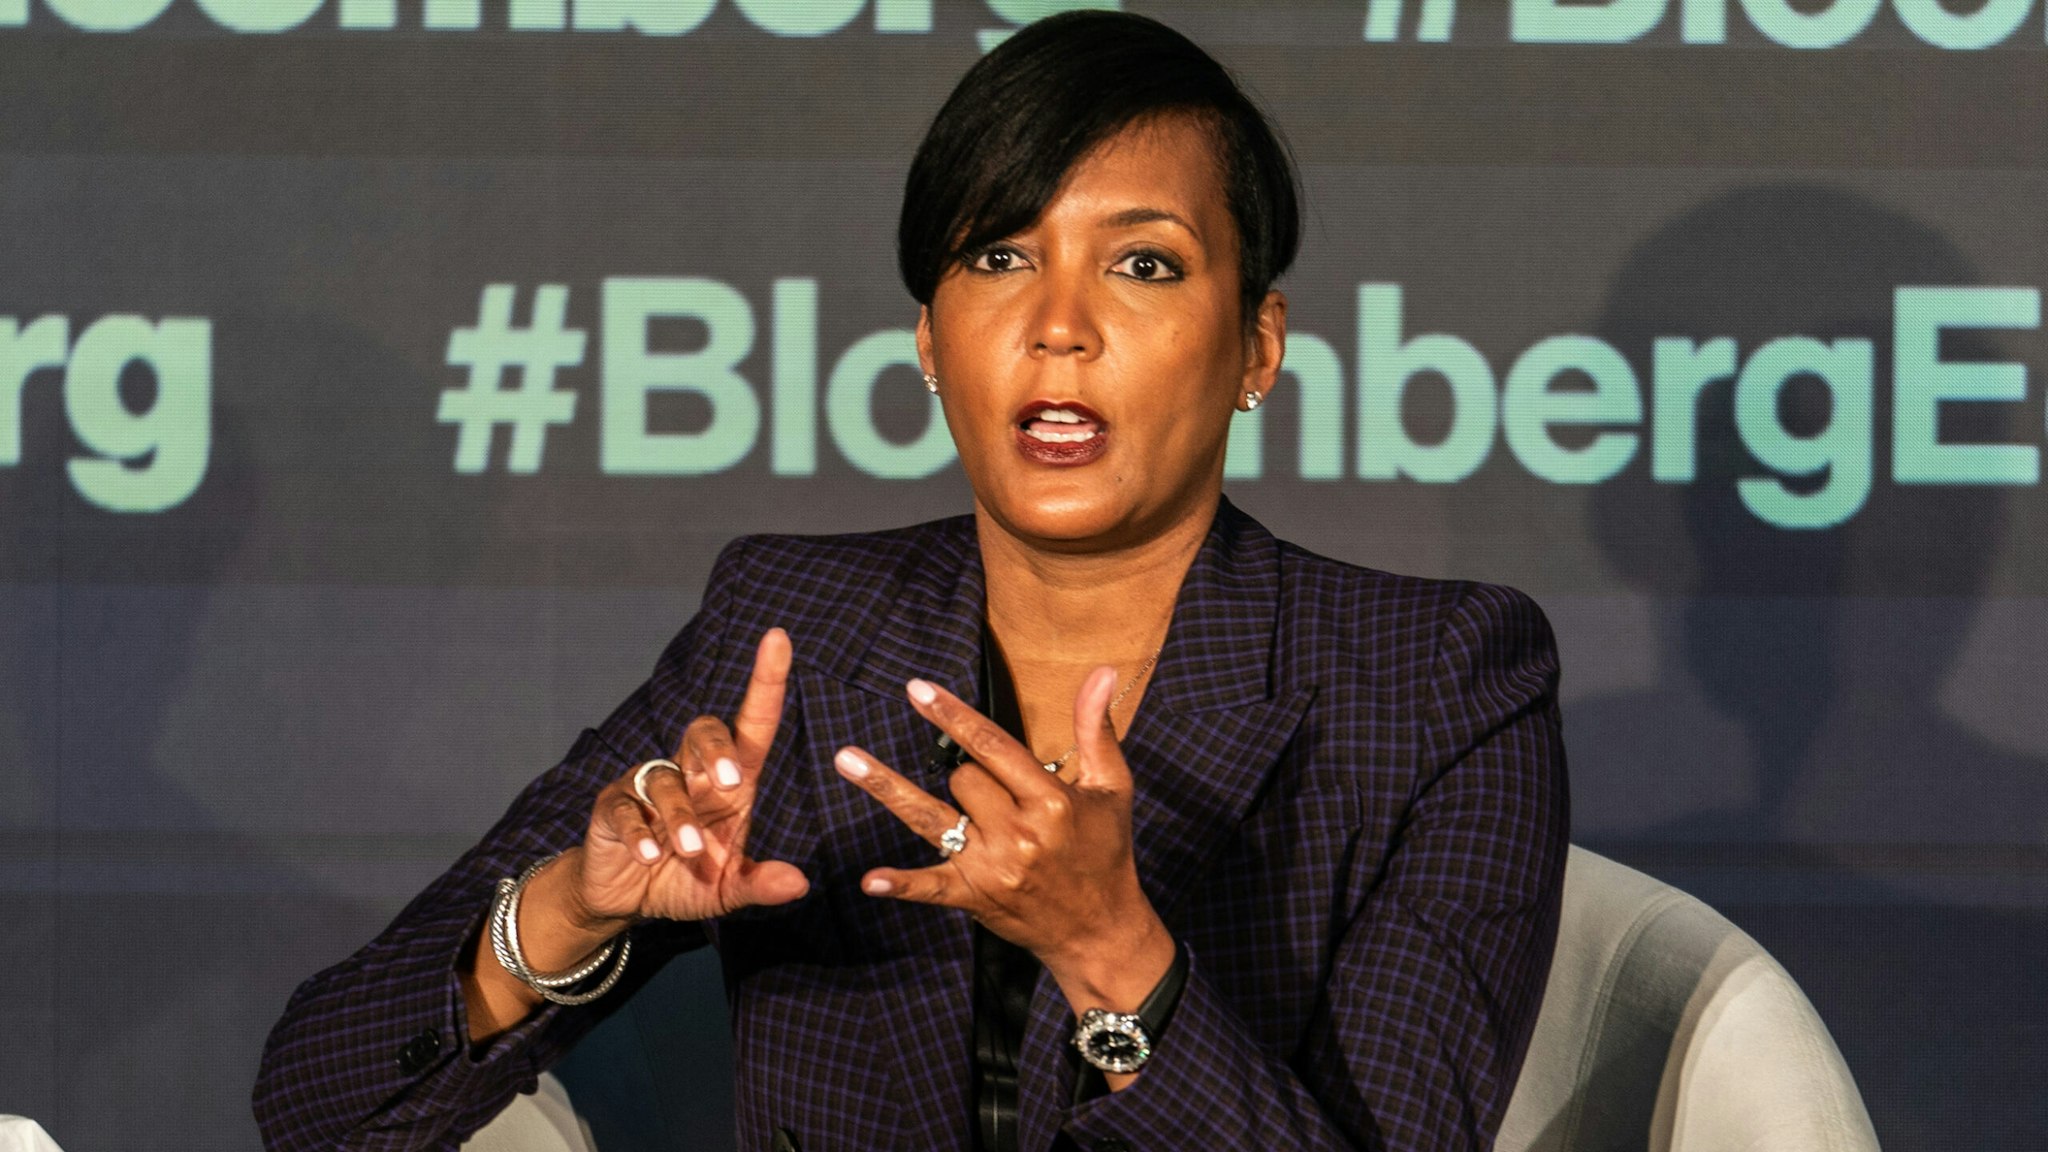 Keisha Lance Bottoms, mayor of Atlanta, speaks during the Bloomberg Equality Summit in New York, U.S., on Tuesday, March 22, 2022. The event convenes leaders to discuss the progress on pledges, policies and programs that are creating a more equitable workplace and society.